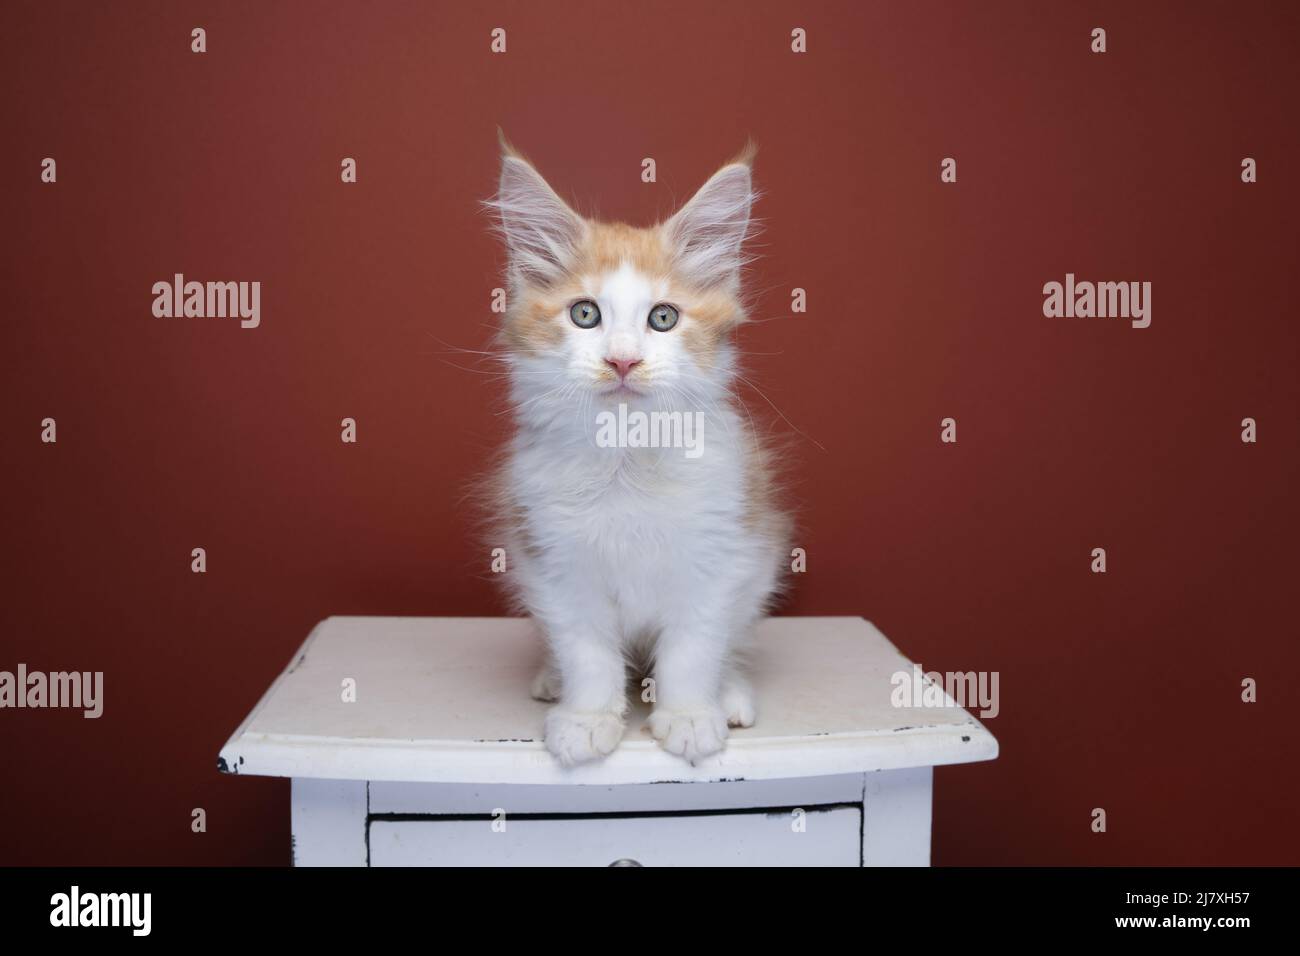 ginger white maine coon kitten sitting on drawer portrait on red brown background with copy space Stock Photo